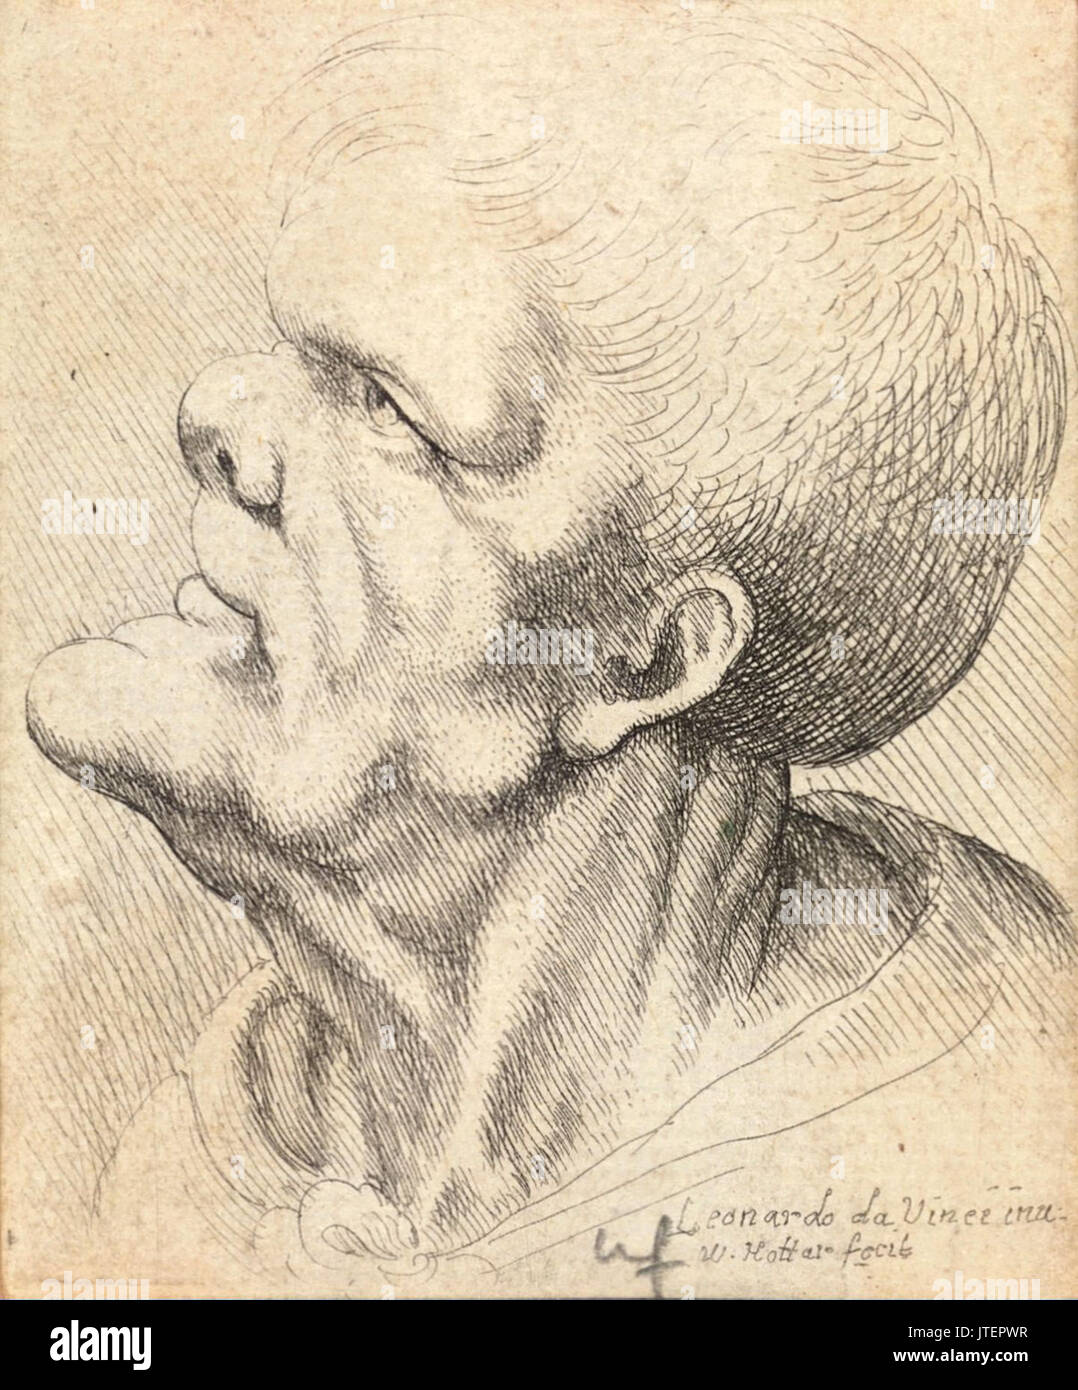 Wenceslas Hollar   Man with snub nose and flattened chin Stock Photo